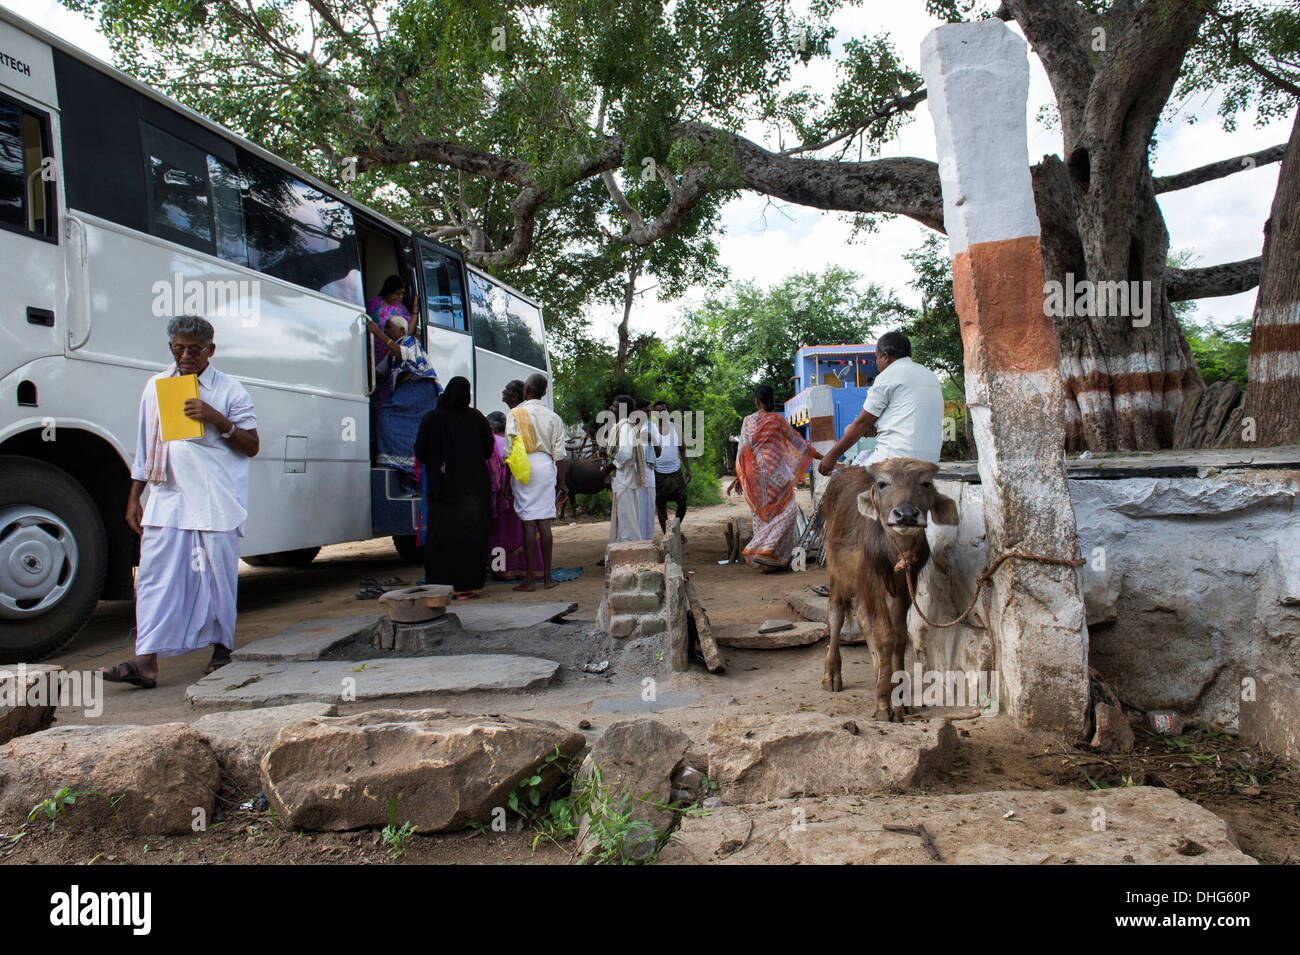 Sathya Sai Baba mobile outreach hospital bus parked at a rural Indian village receiving patients. Andhra Pradesh, India Stock Photo